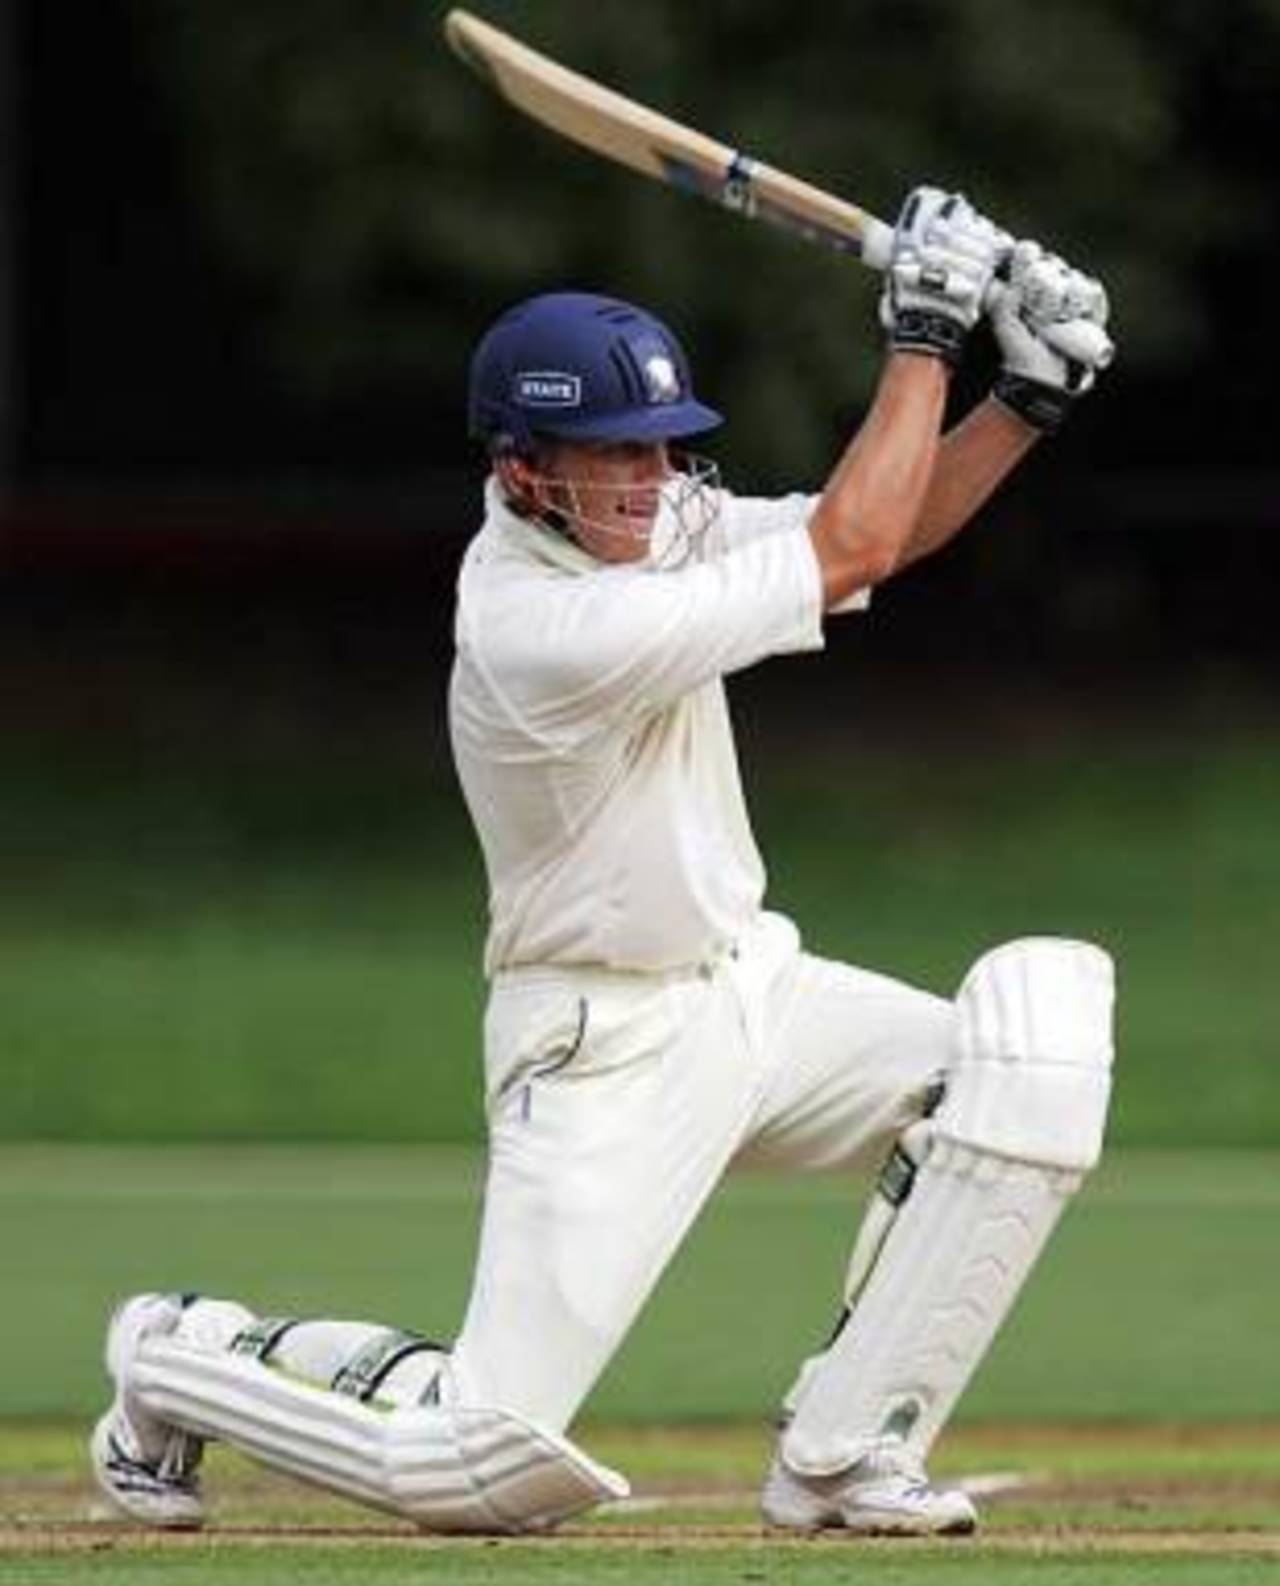 Rob Nicol scored 34 against Wellington, Auckland v Wellington, State Championship, 1st day, Auckland, March 6, 2008